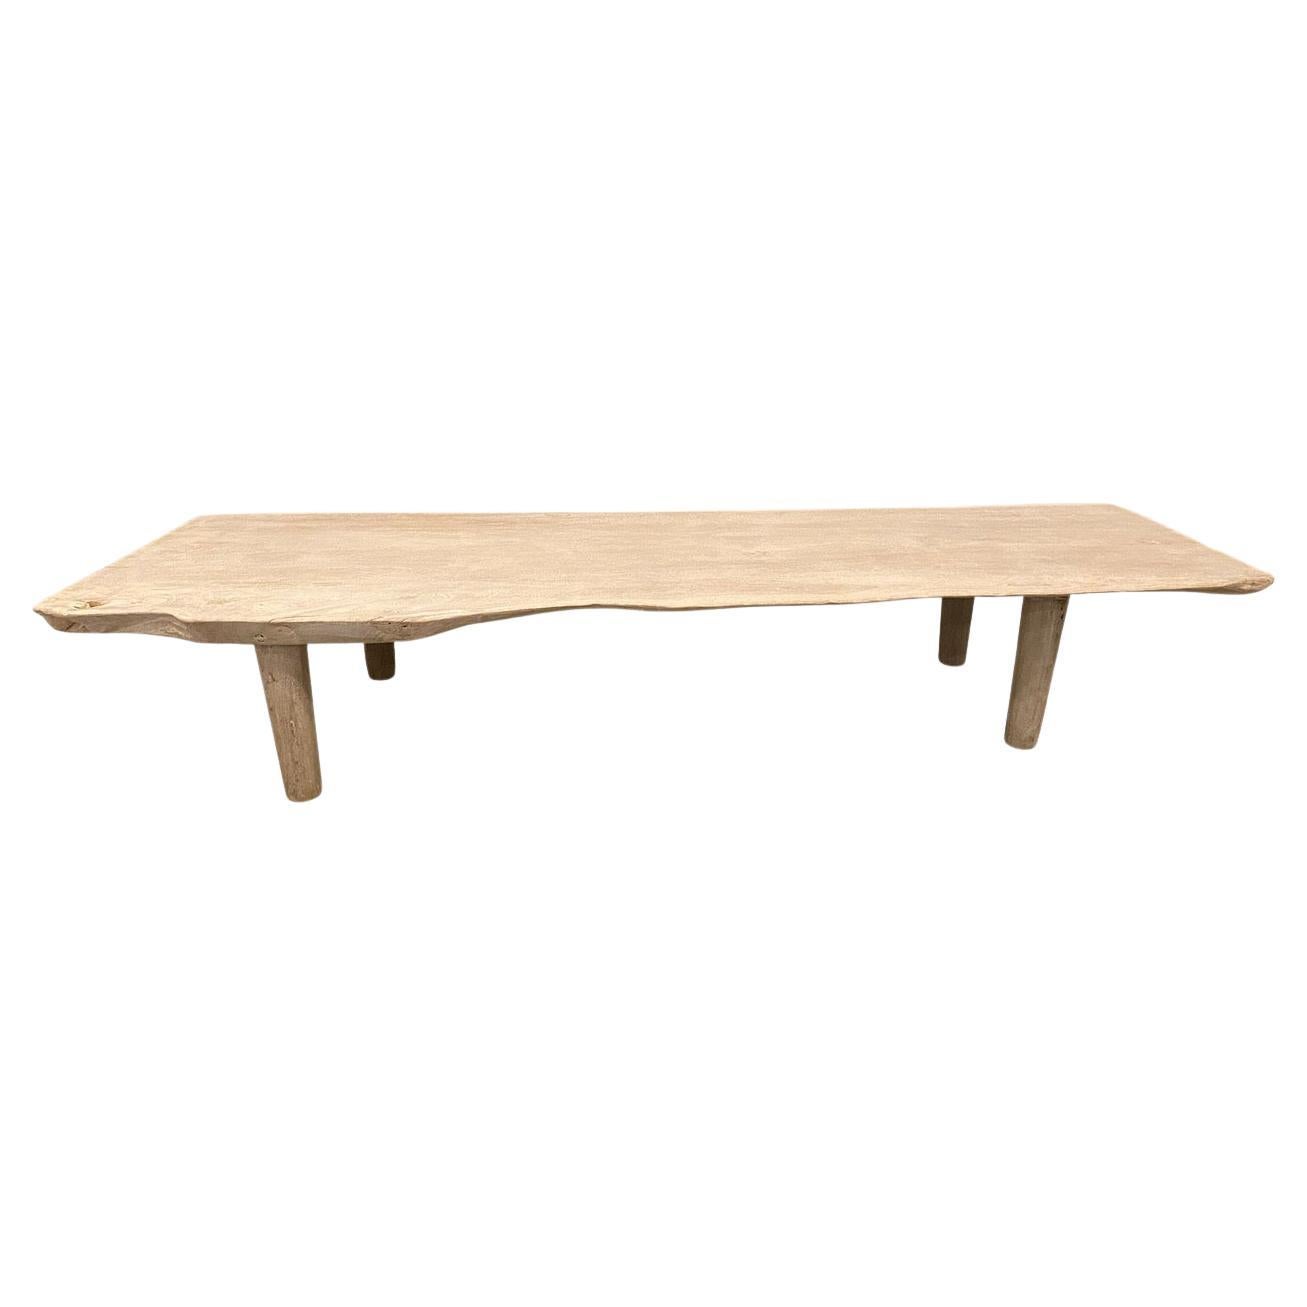 Andrianna Shamaris White Washed Live Edge Teak Wood Coffee Table or Bench For Sale